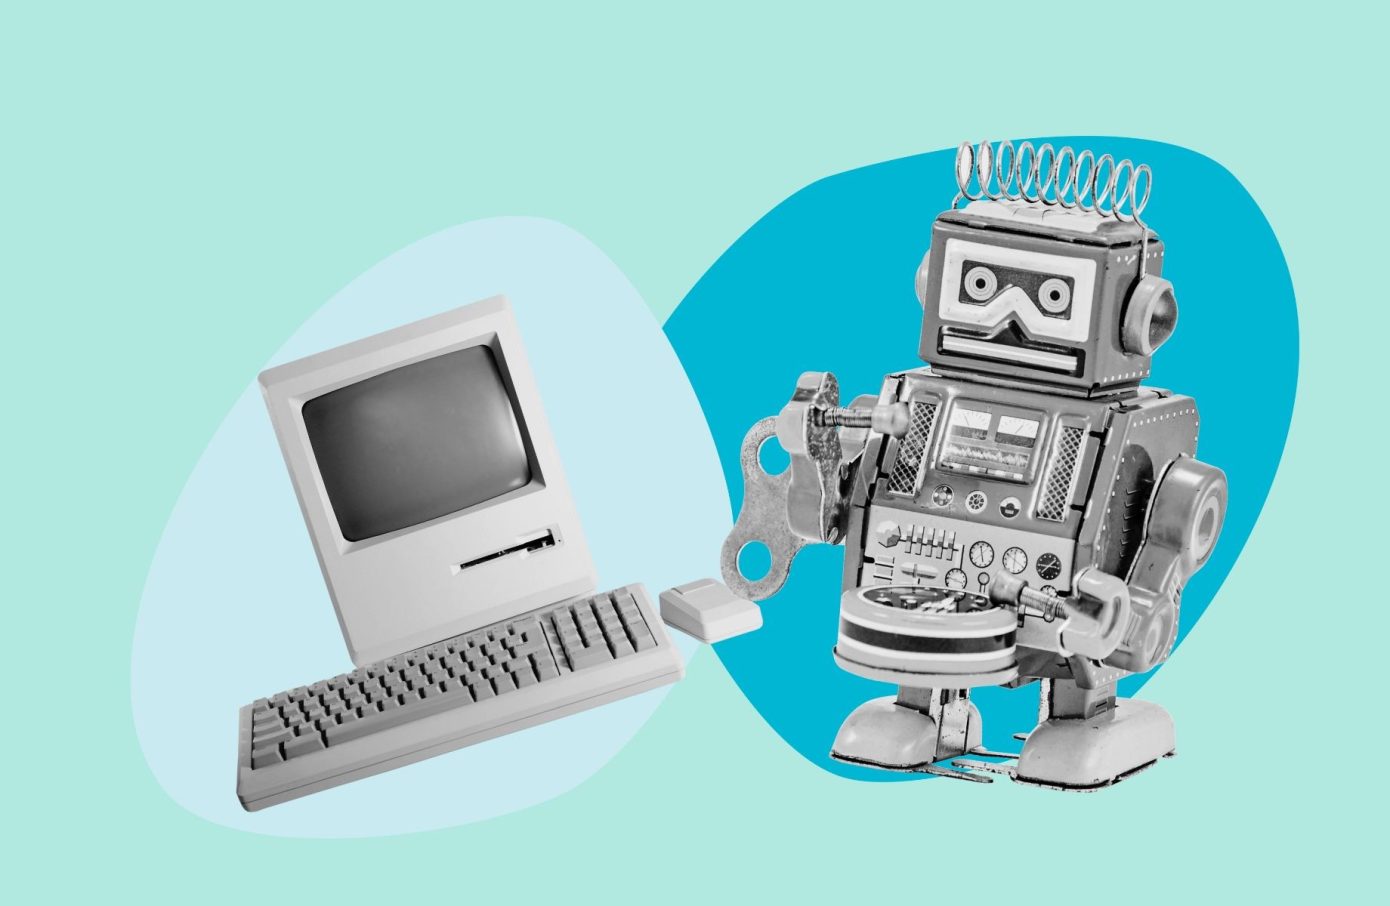 a vintage to robot and a vintage mac computer